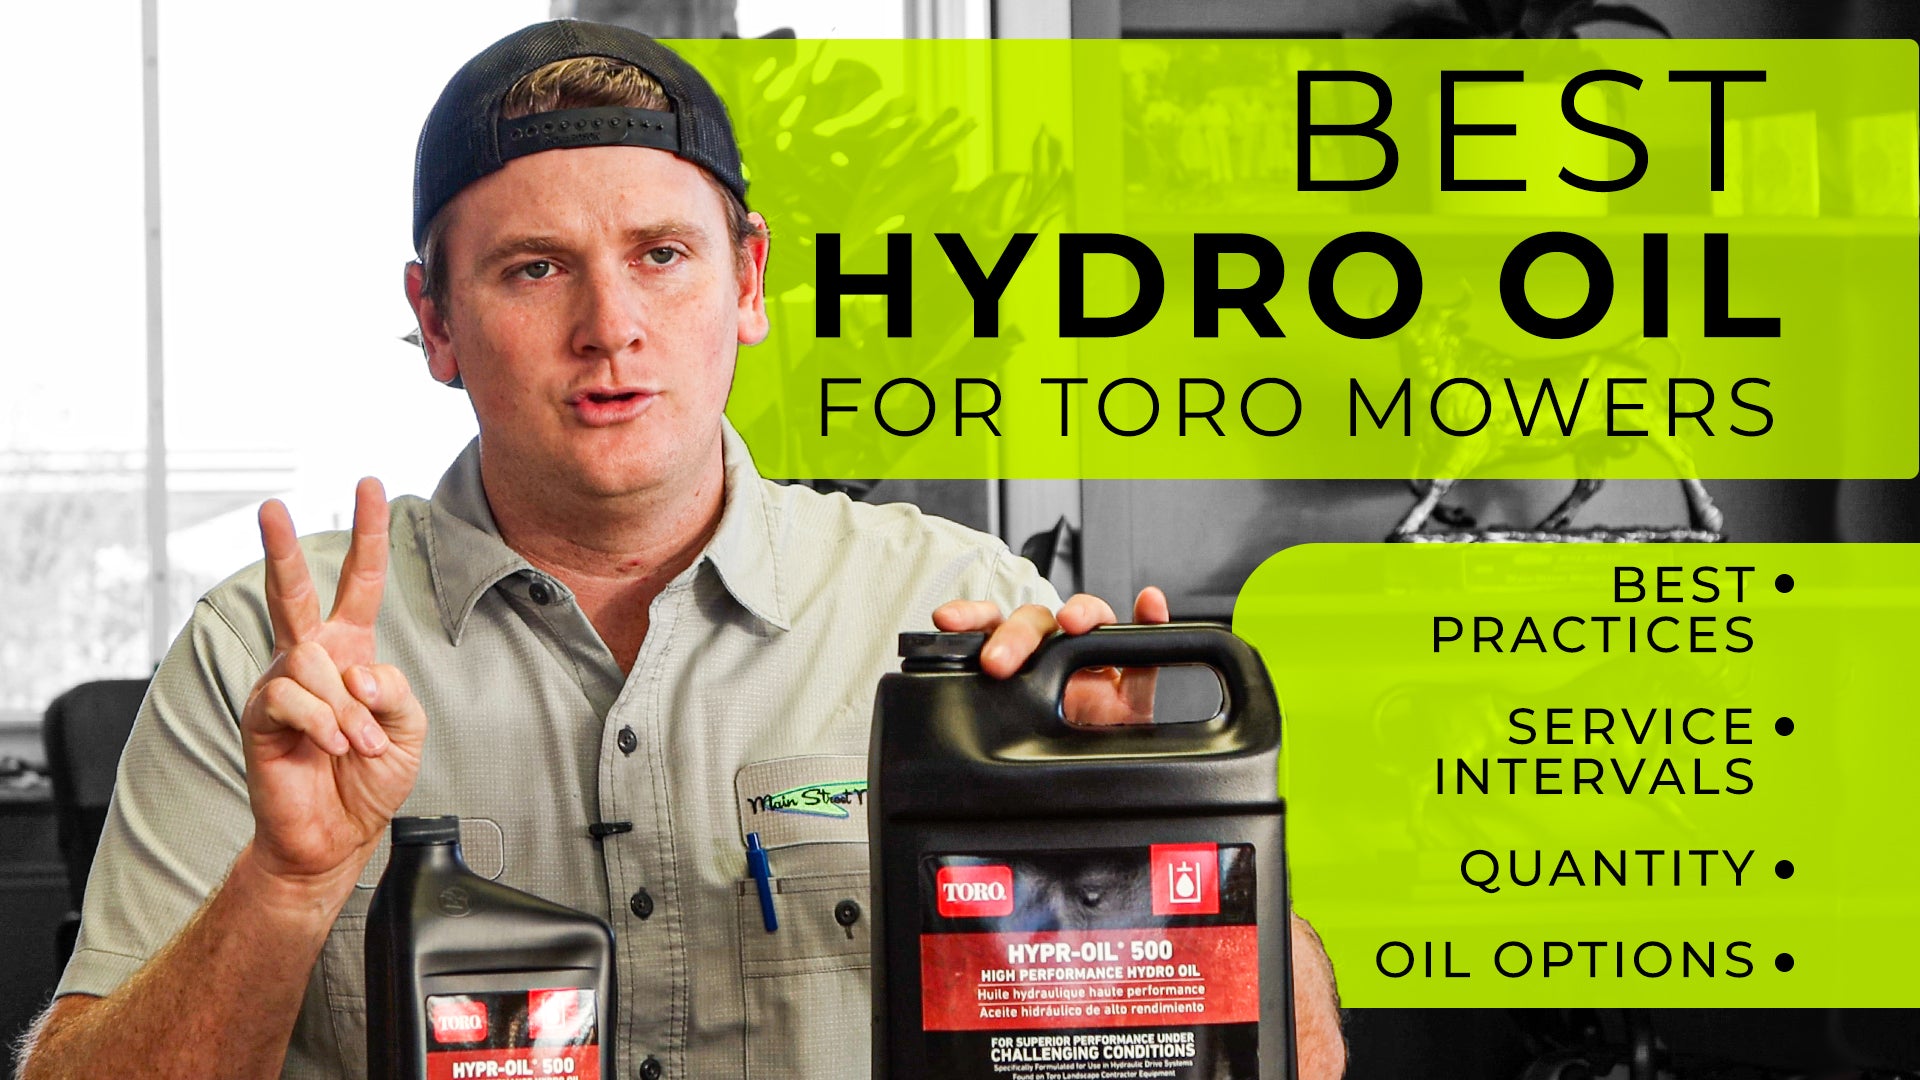 HYDRO OIL Guide for TORO Mowers | Process, Products, Quantity, & Servicing!